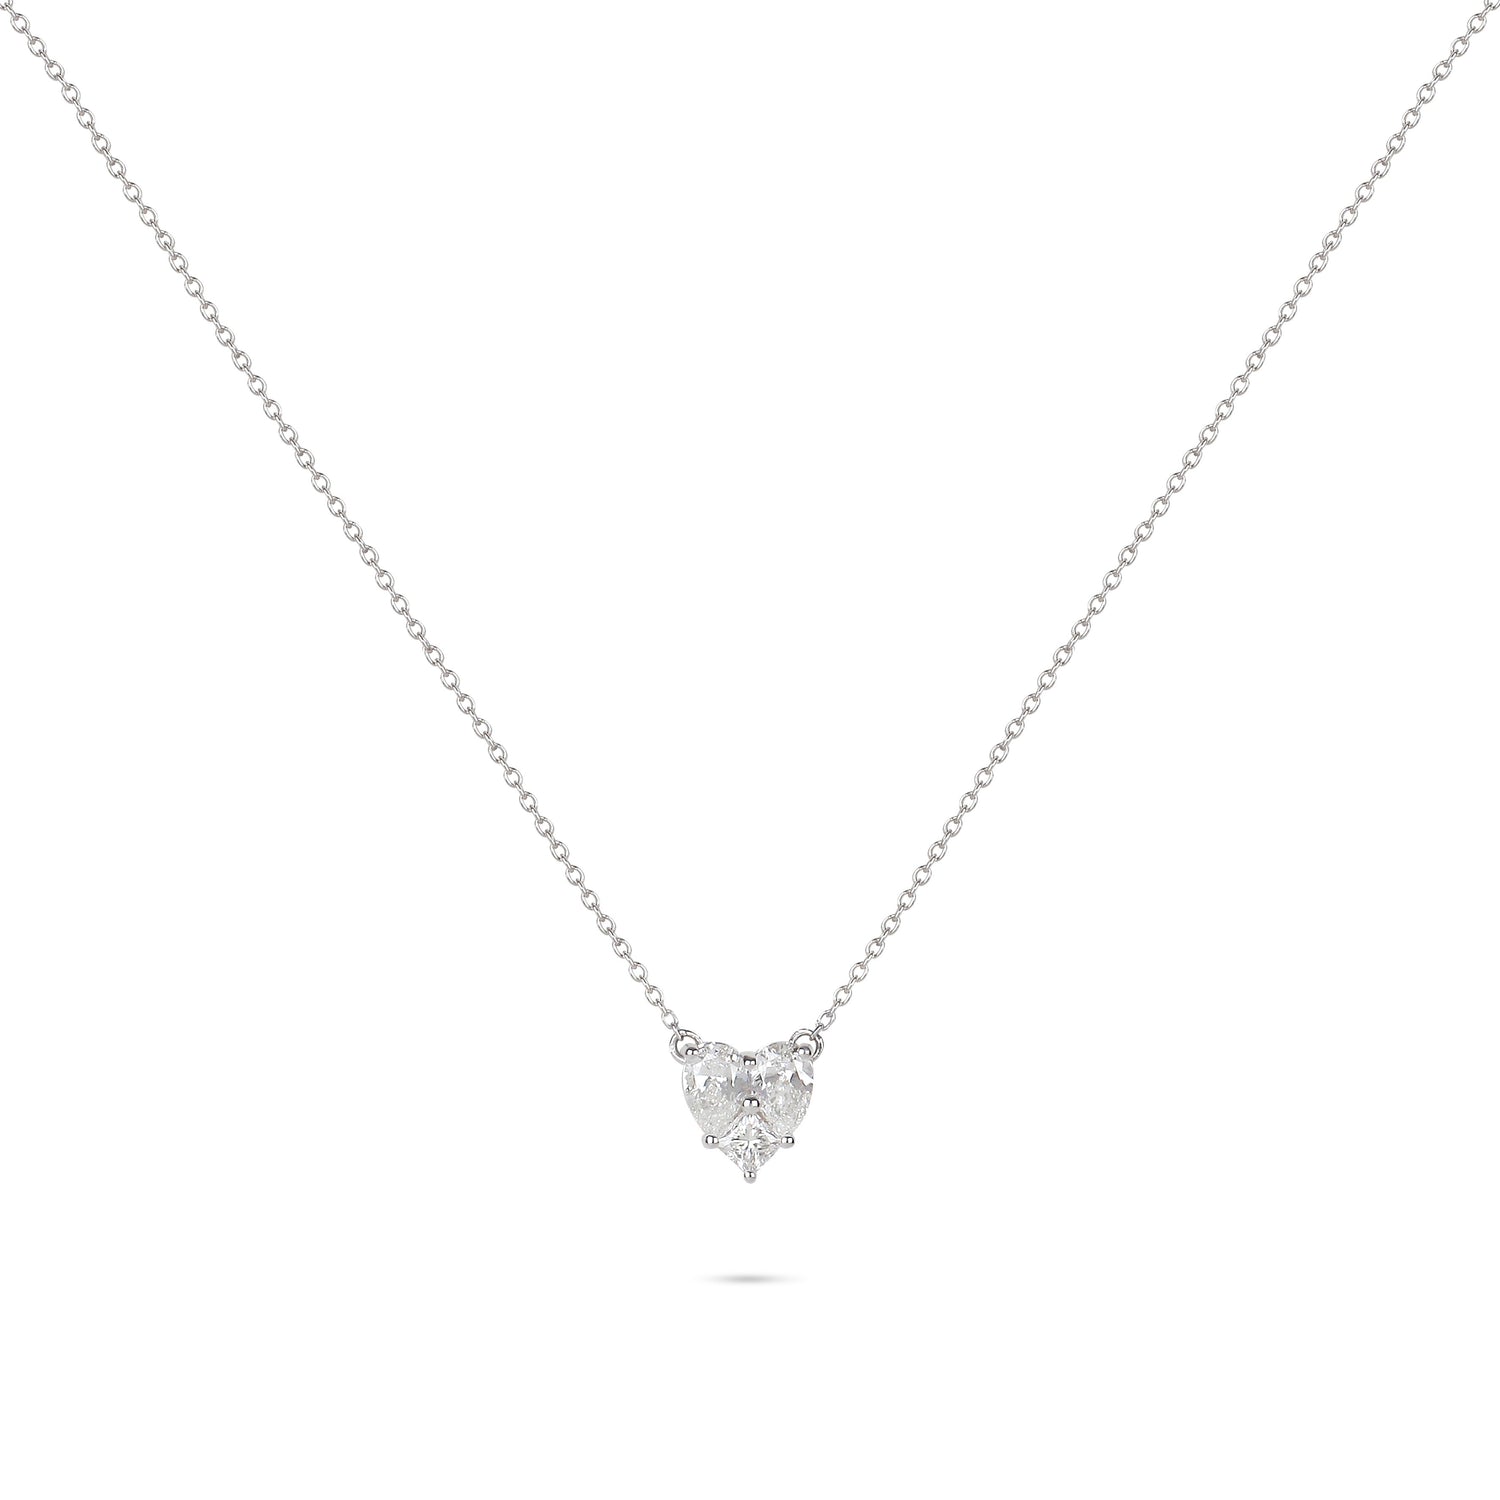 Heart Shaped Illusion Diamond Necklace | Diamond Necklace | Necklaces For Women